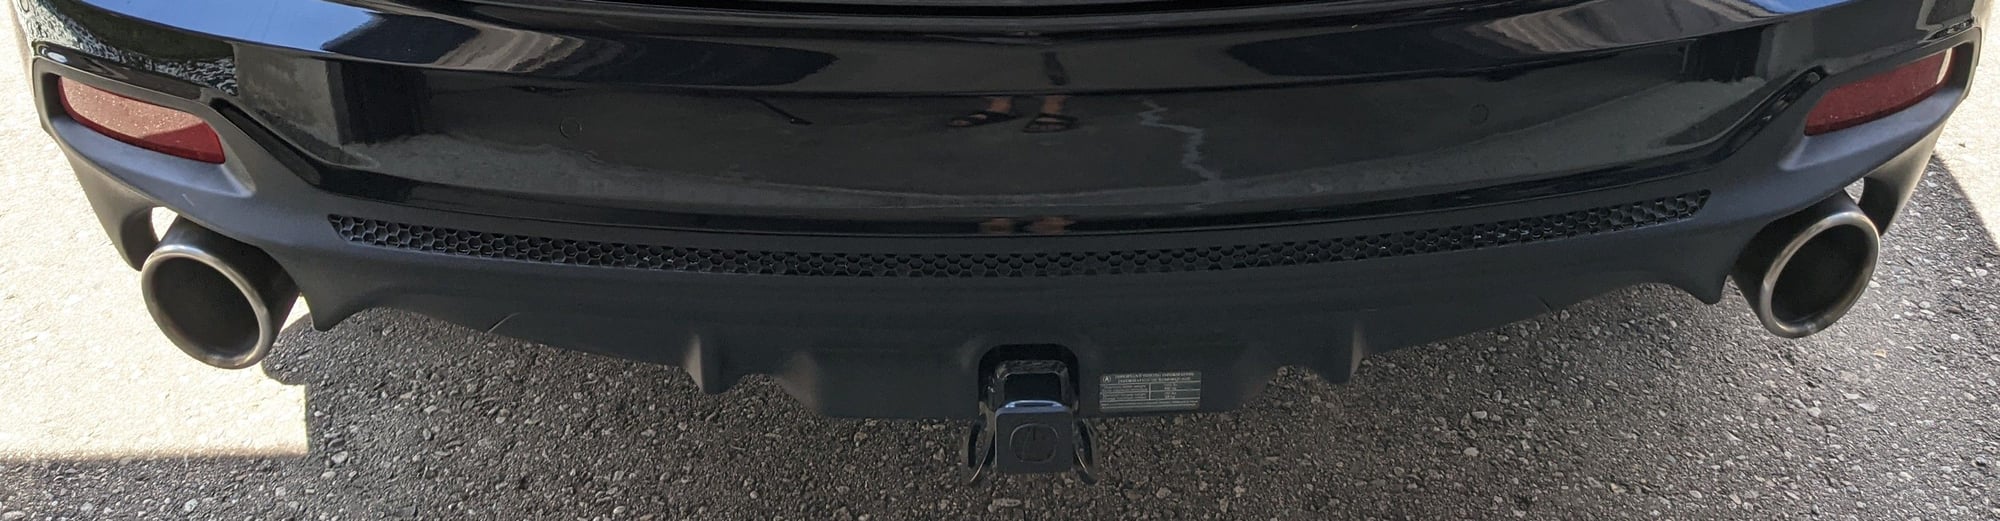 Exterior Body Parts - FS: 2019-2021 Acura RDX Towing Hitch with Trim Cover (OEM) - Used - 2019 to 2021 Acura RDX - Kitchener, ON N2R0A7, Canada